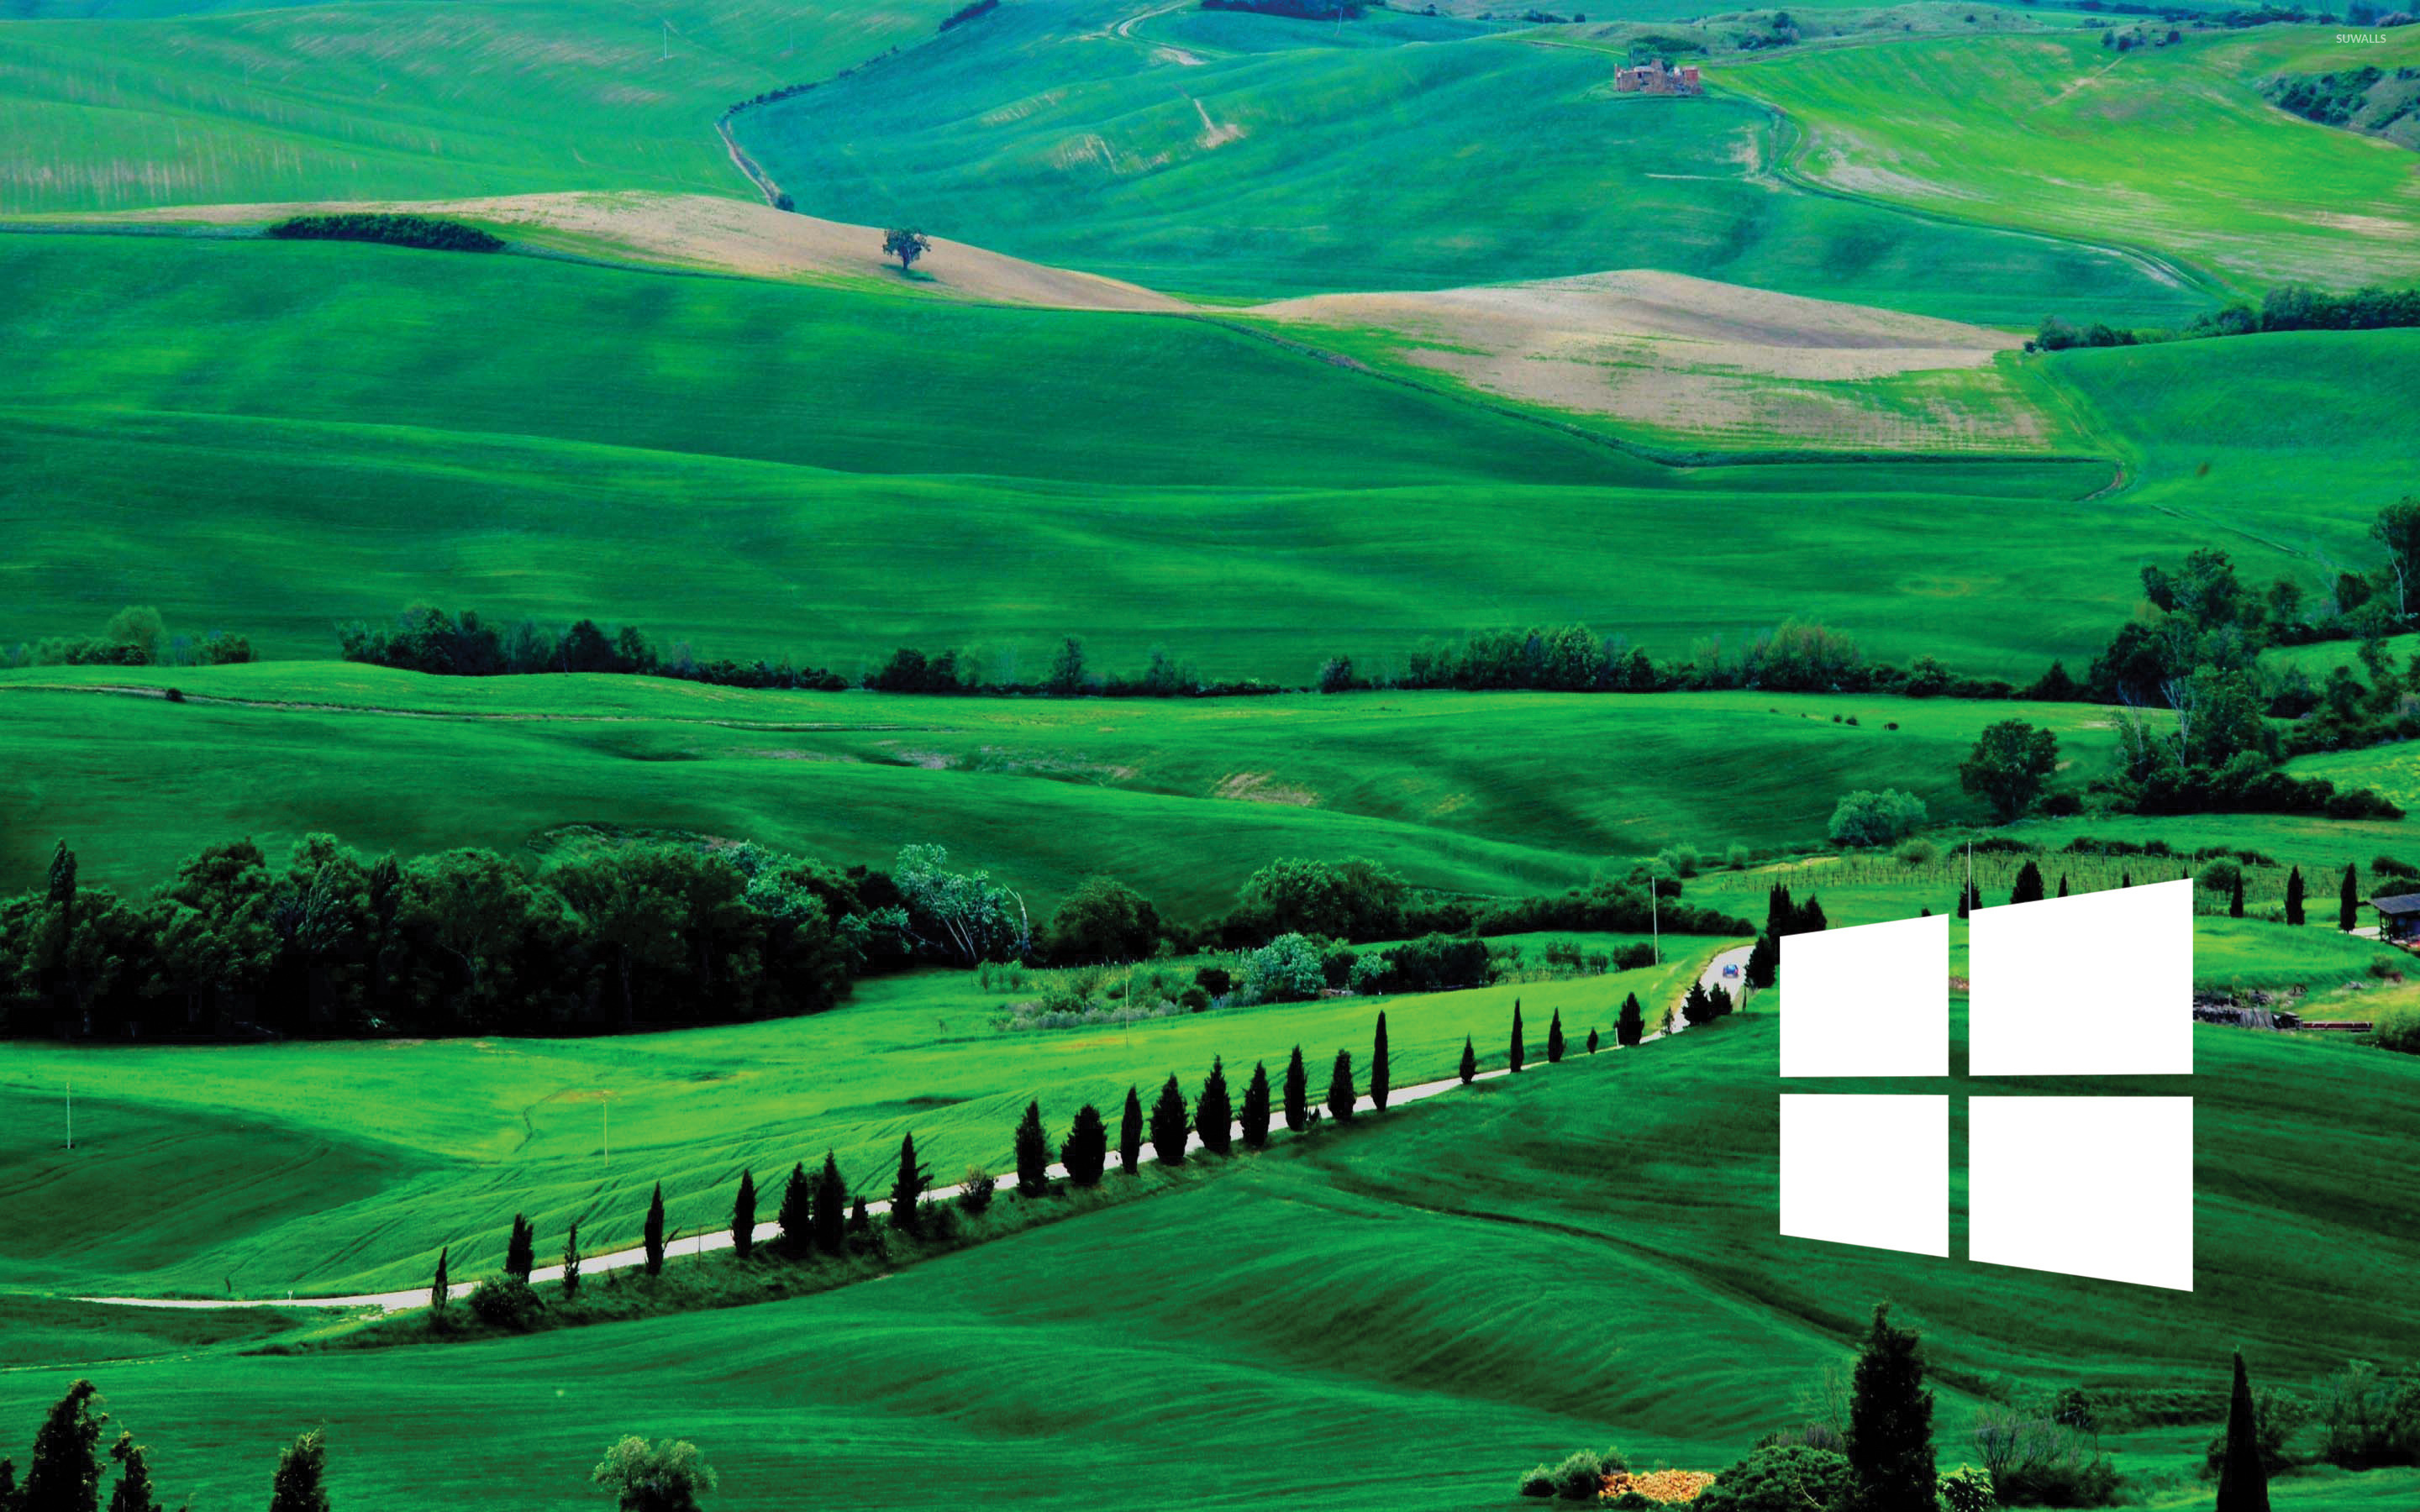 Windows 10 white simple logo over the green hills wallpaper - Computer